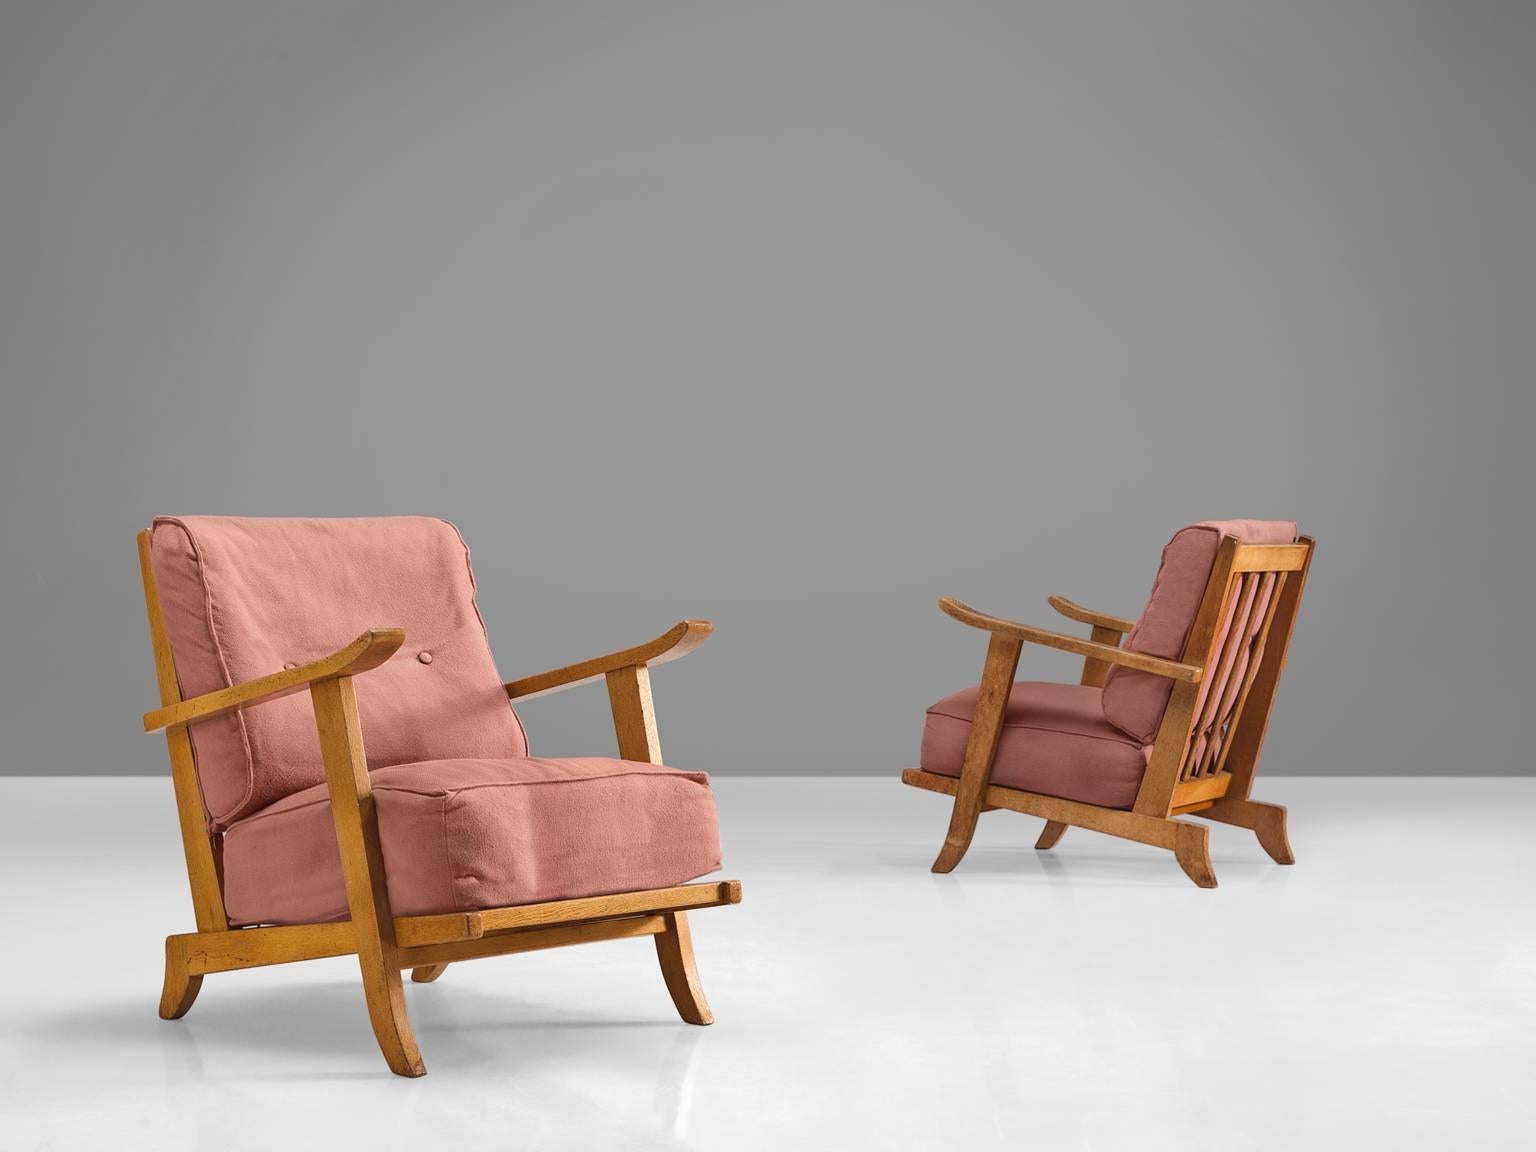 Easy chairs, pink fabric, oak,, France, 1950s

These sculptural easy chairs are part of the midcentury design collection. The chairs are executed out of high quality solid oak. These comfortable armchairs have an interesting open construction, with